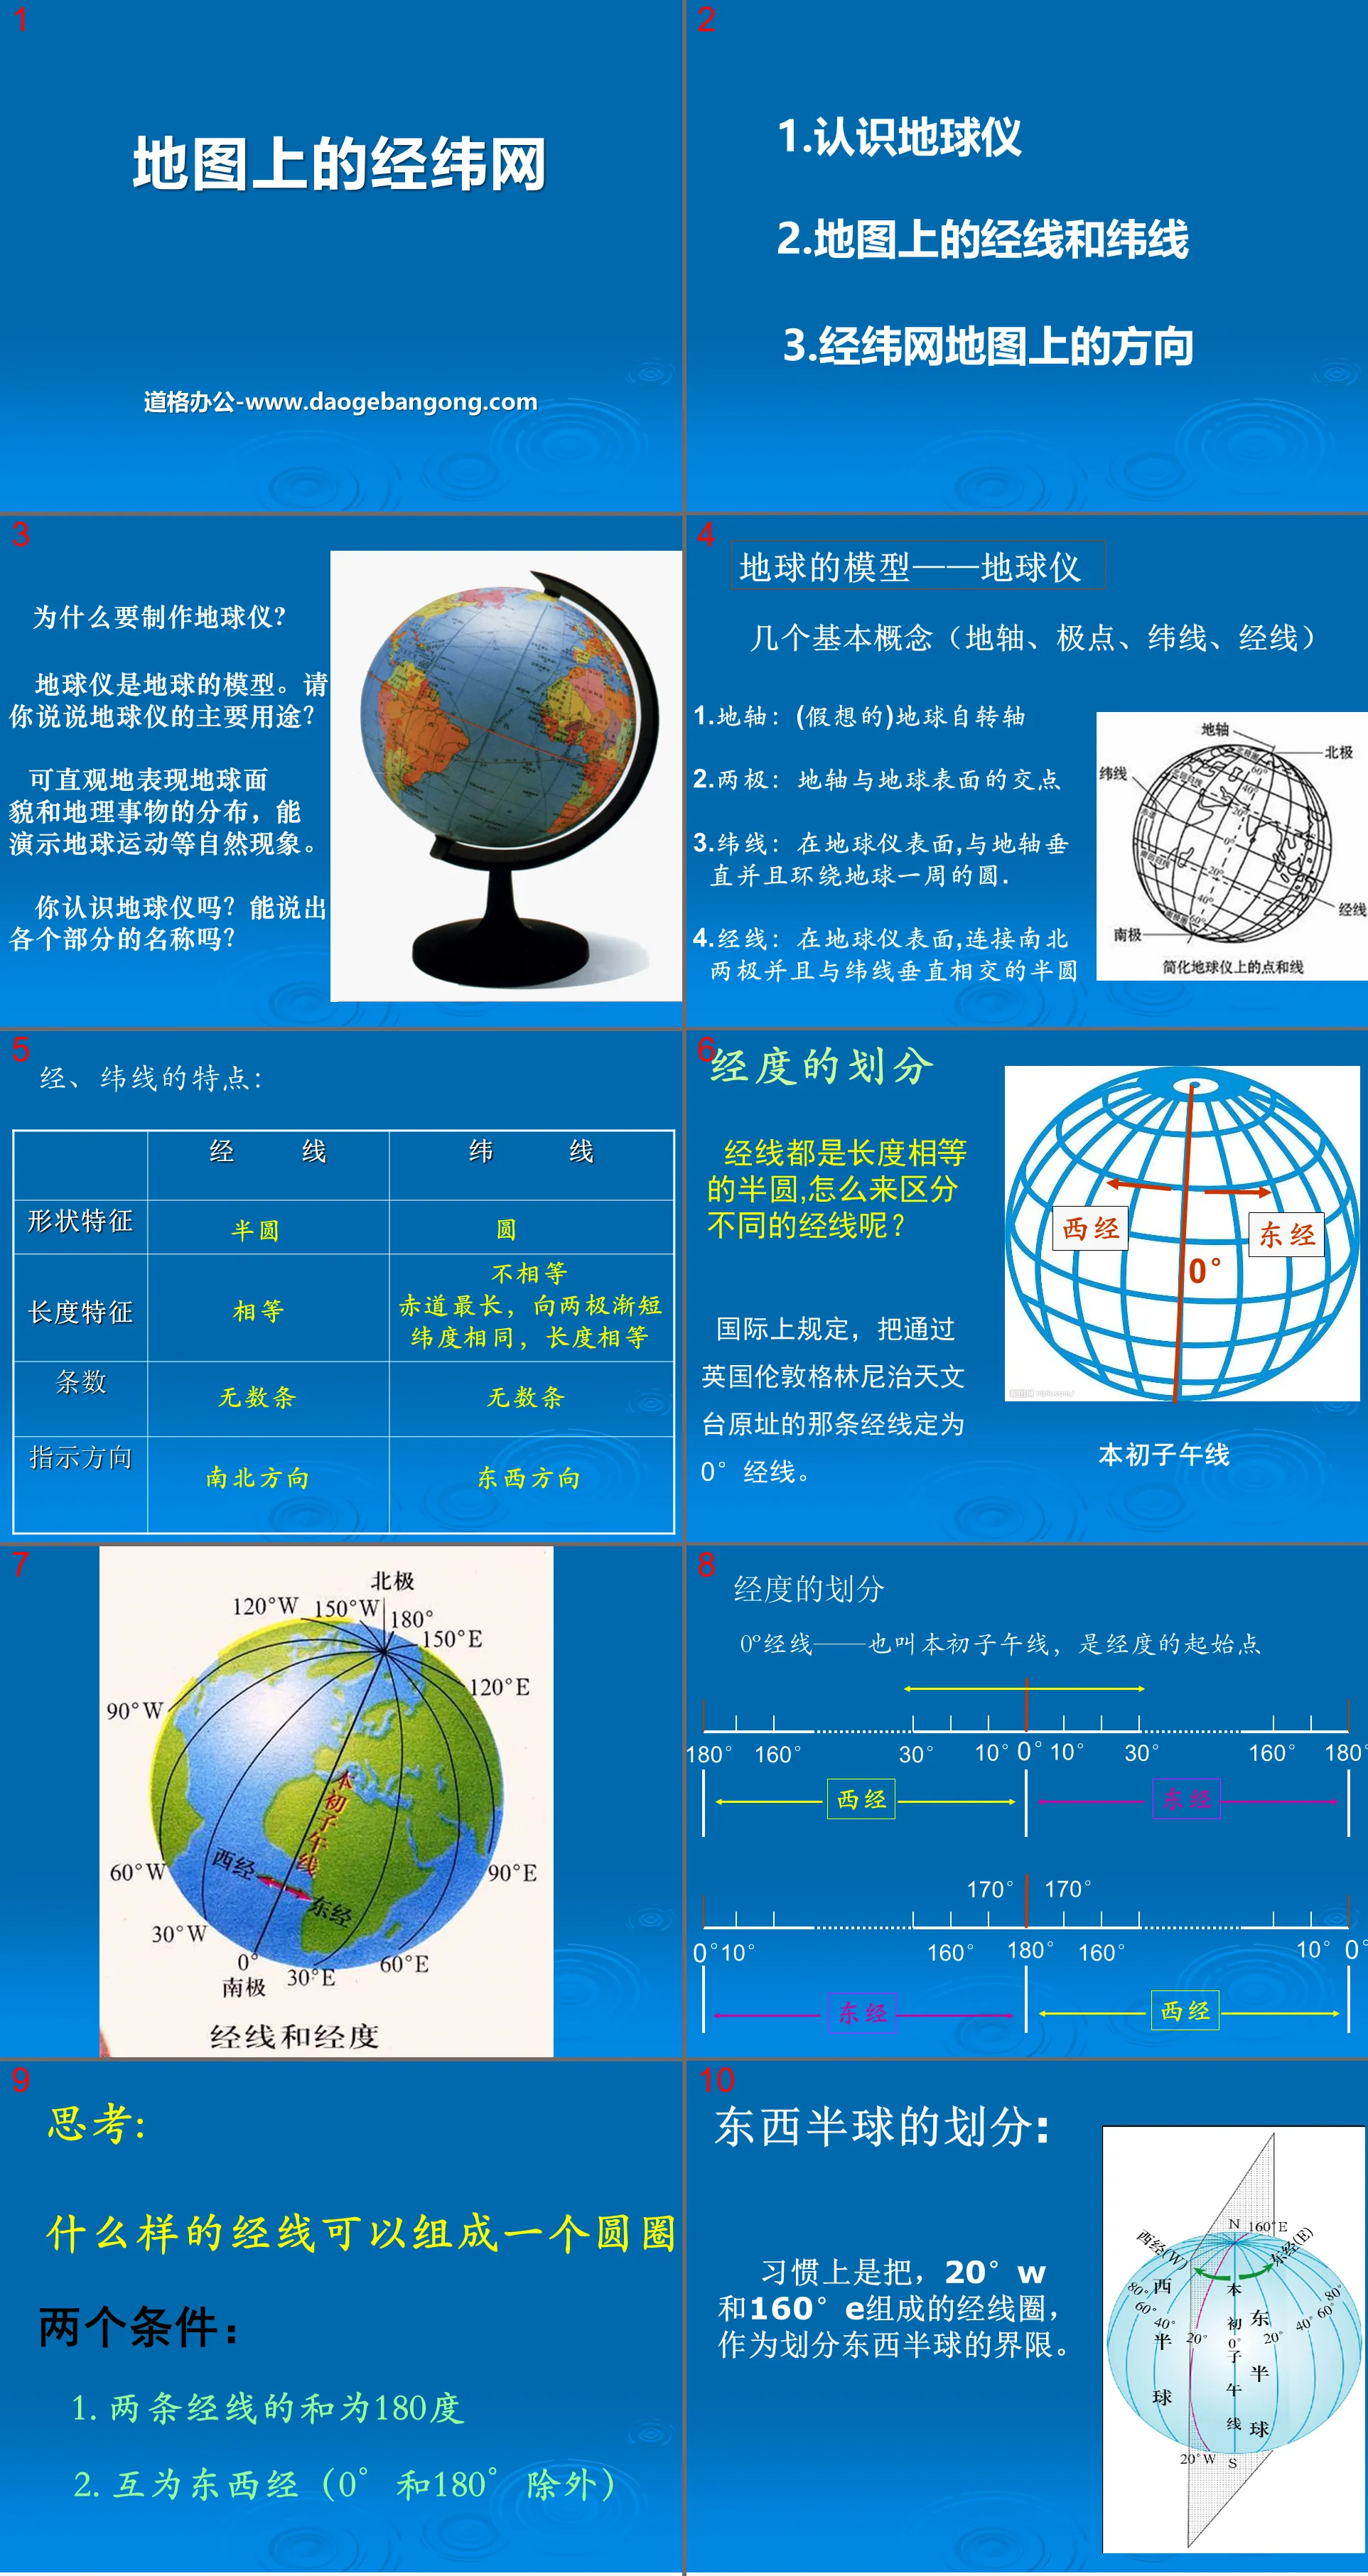 "Jingwei Network on the Map" PPT courseware download